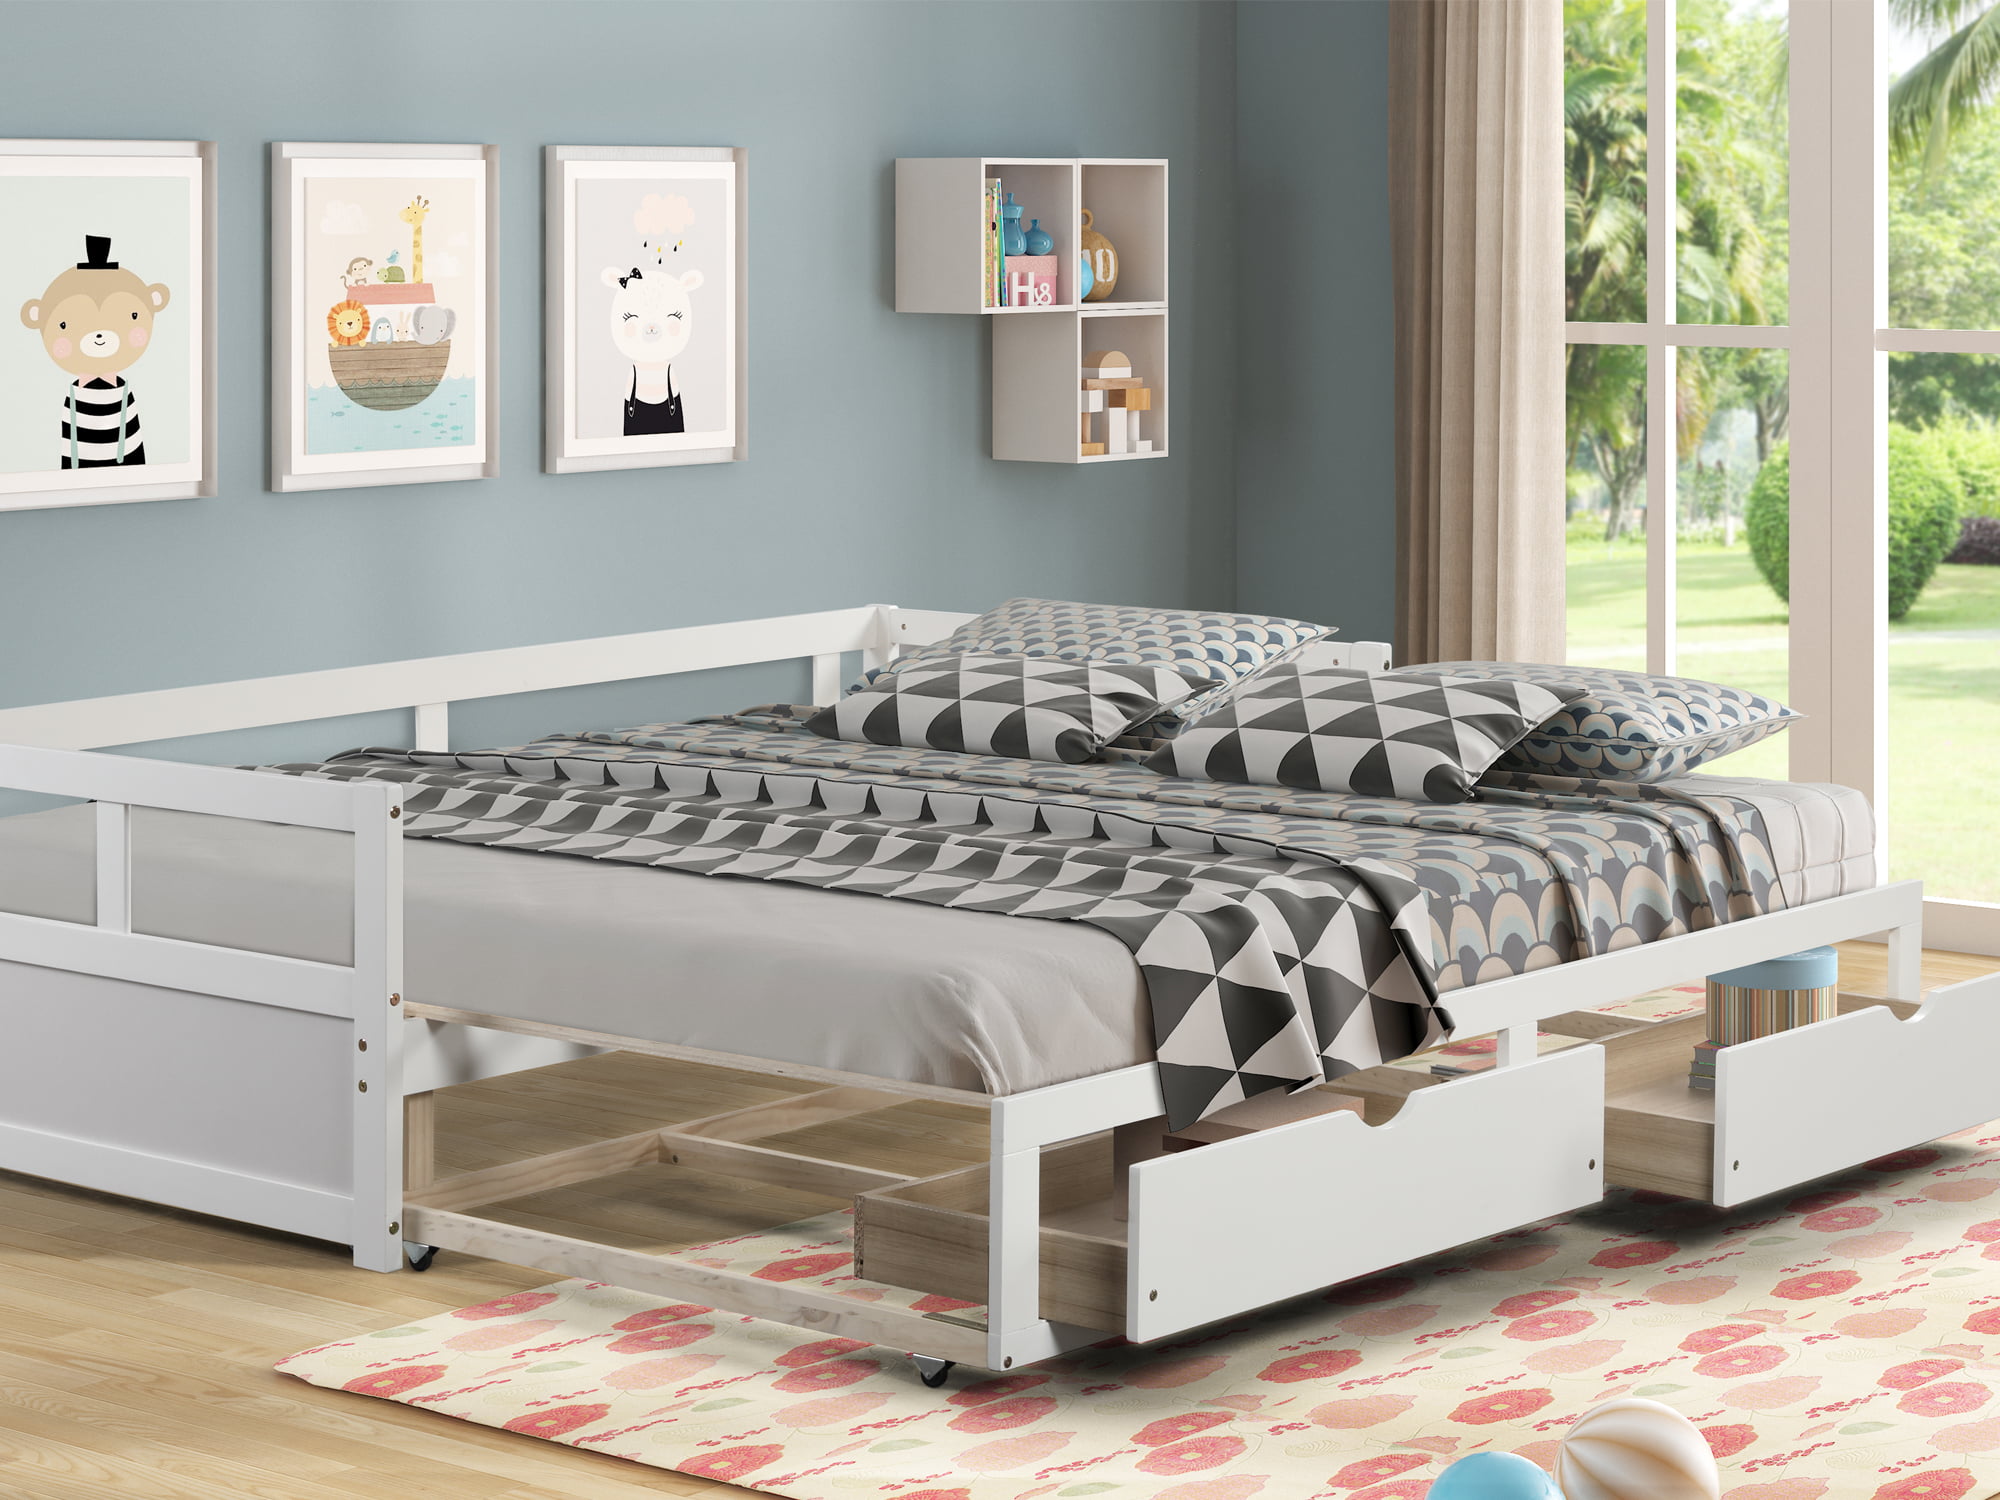 Wood Daybed With Storage Drawers And, Twin Size Mattress For Trundle Bed